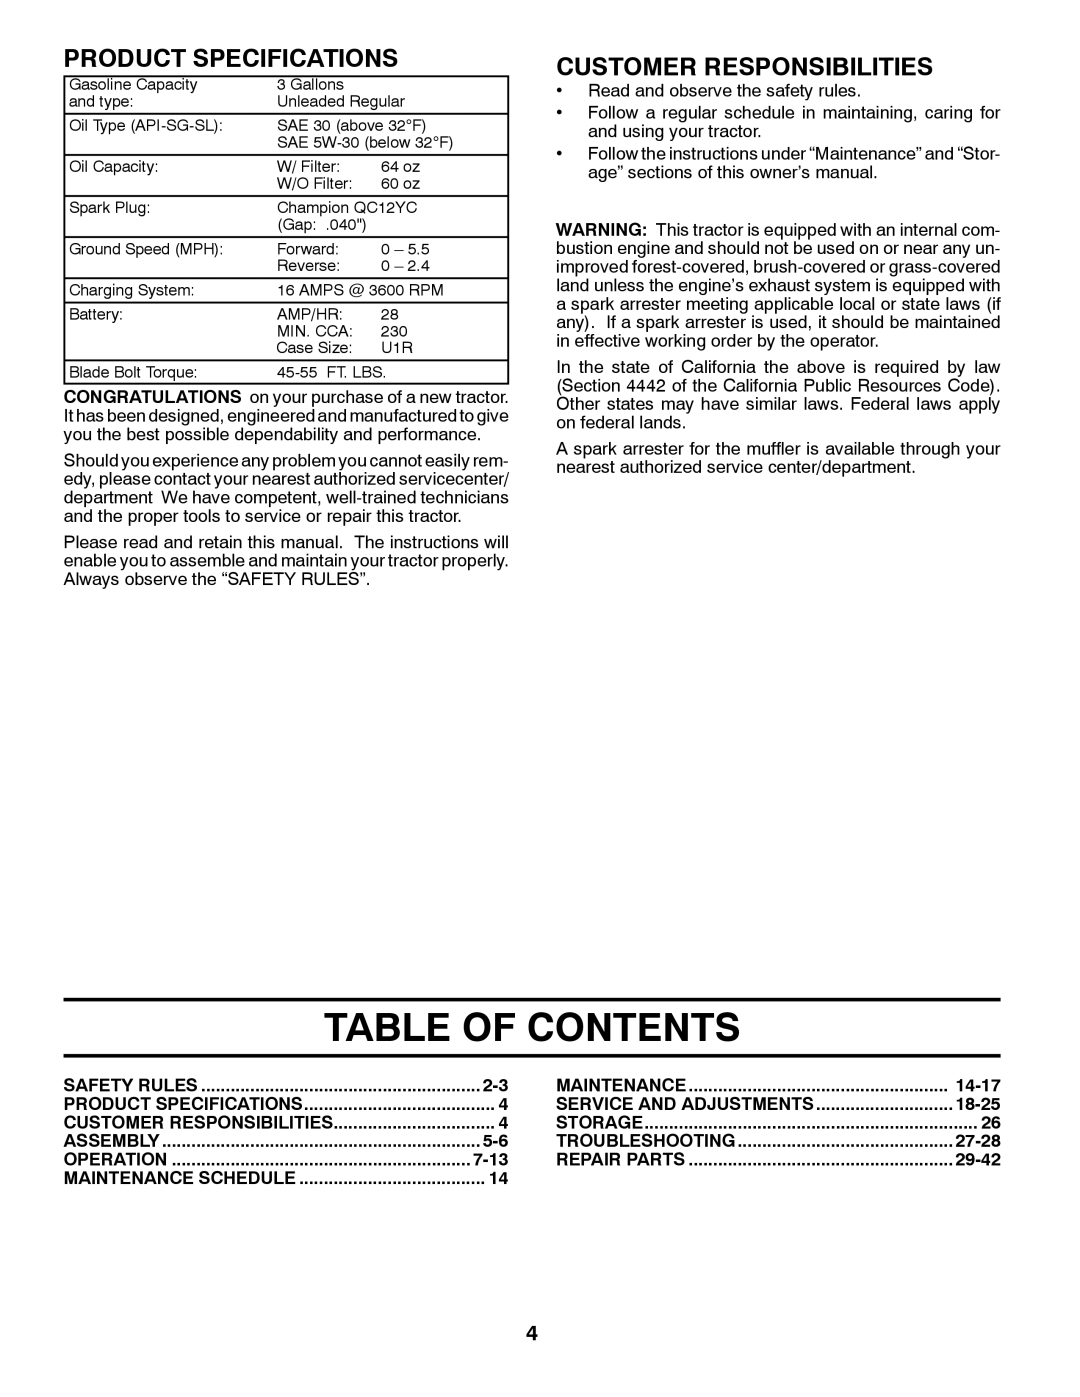 Univex 96043004400, 2348LS owner manual Table Of Contents, Product Specifications, Customer Responsibilities 